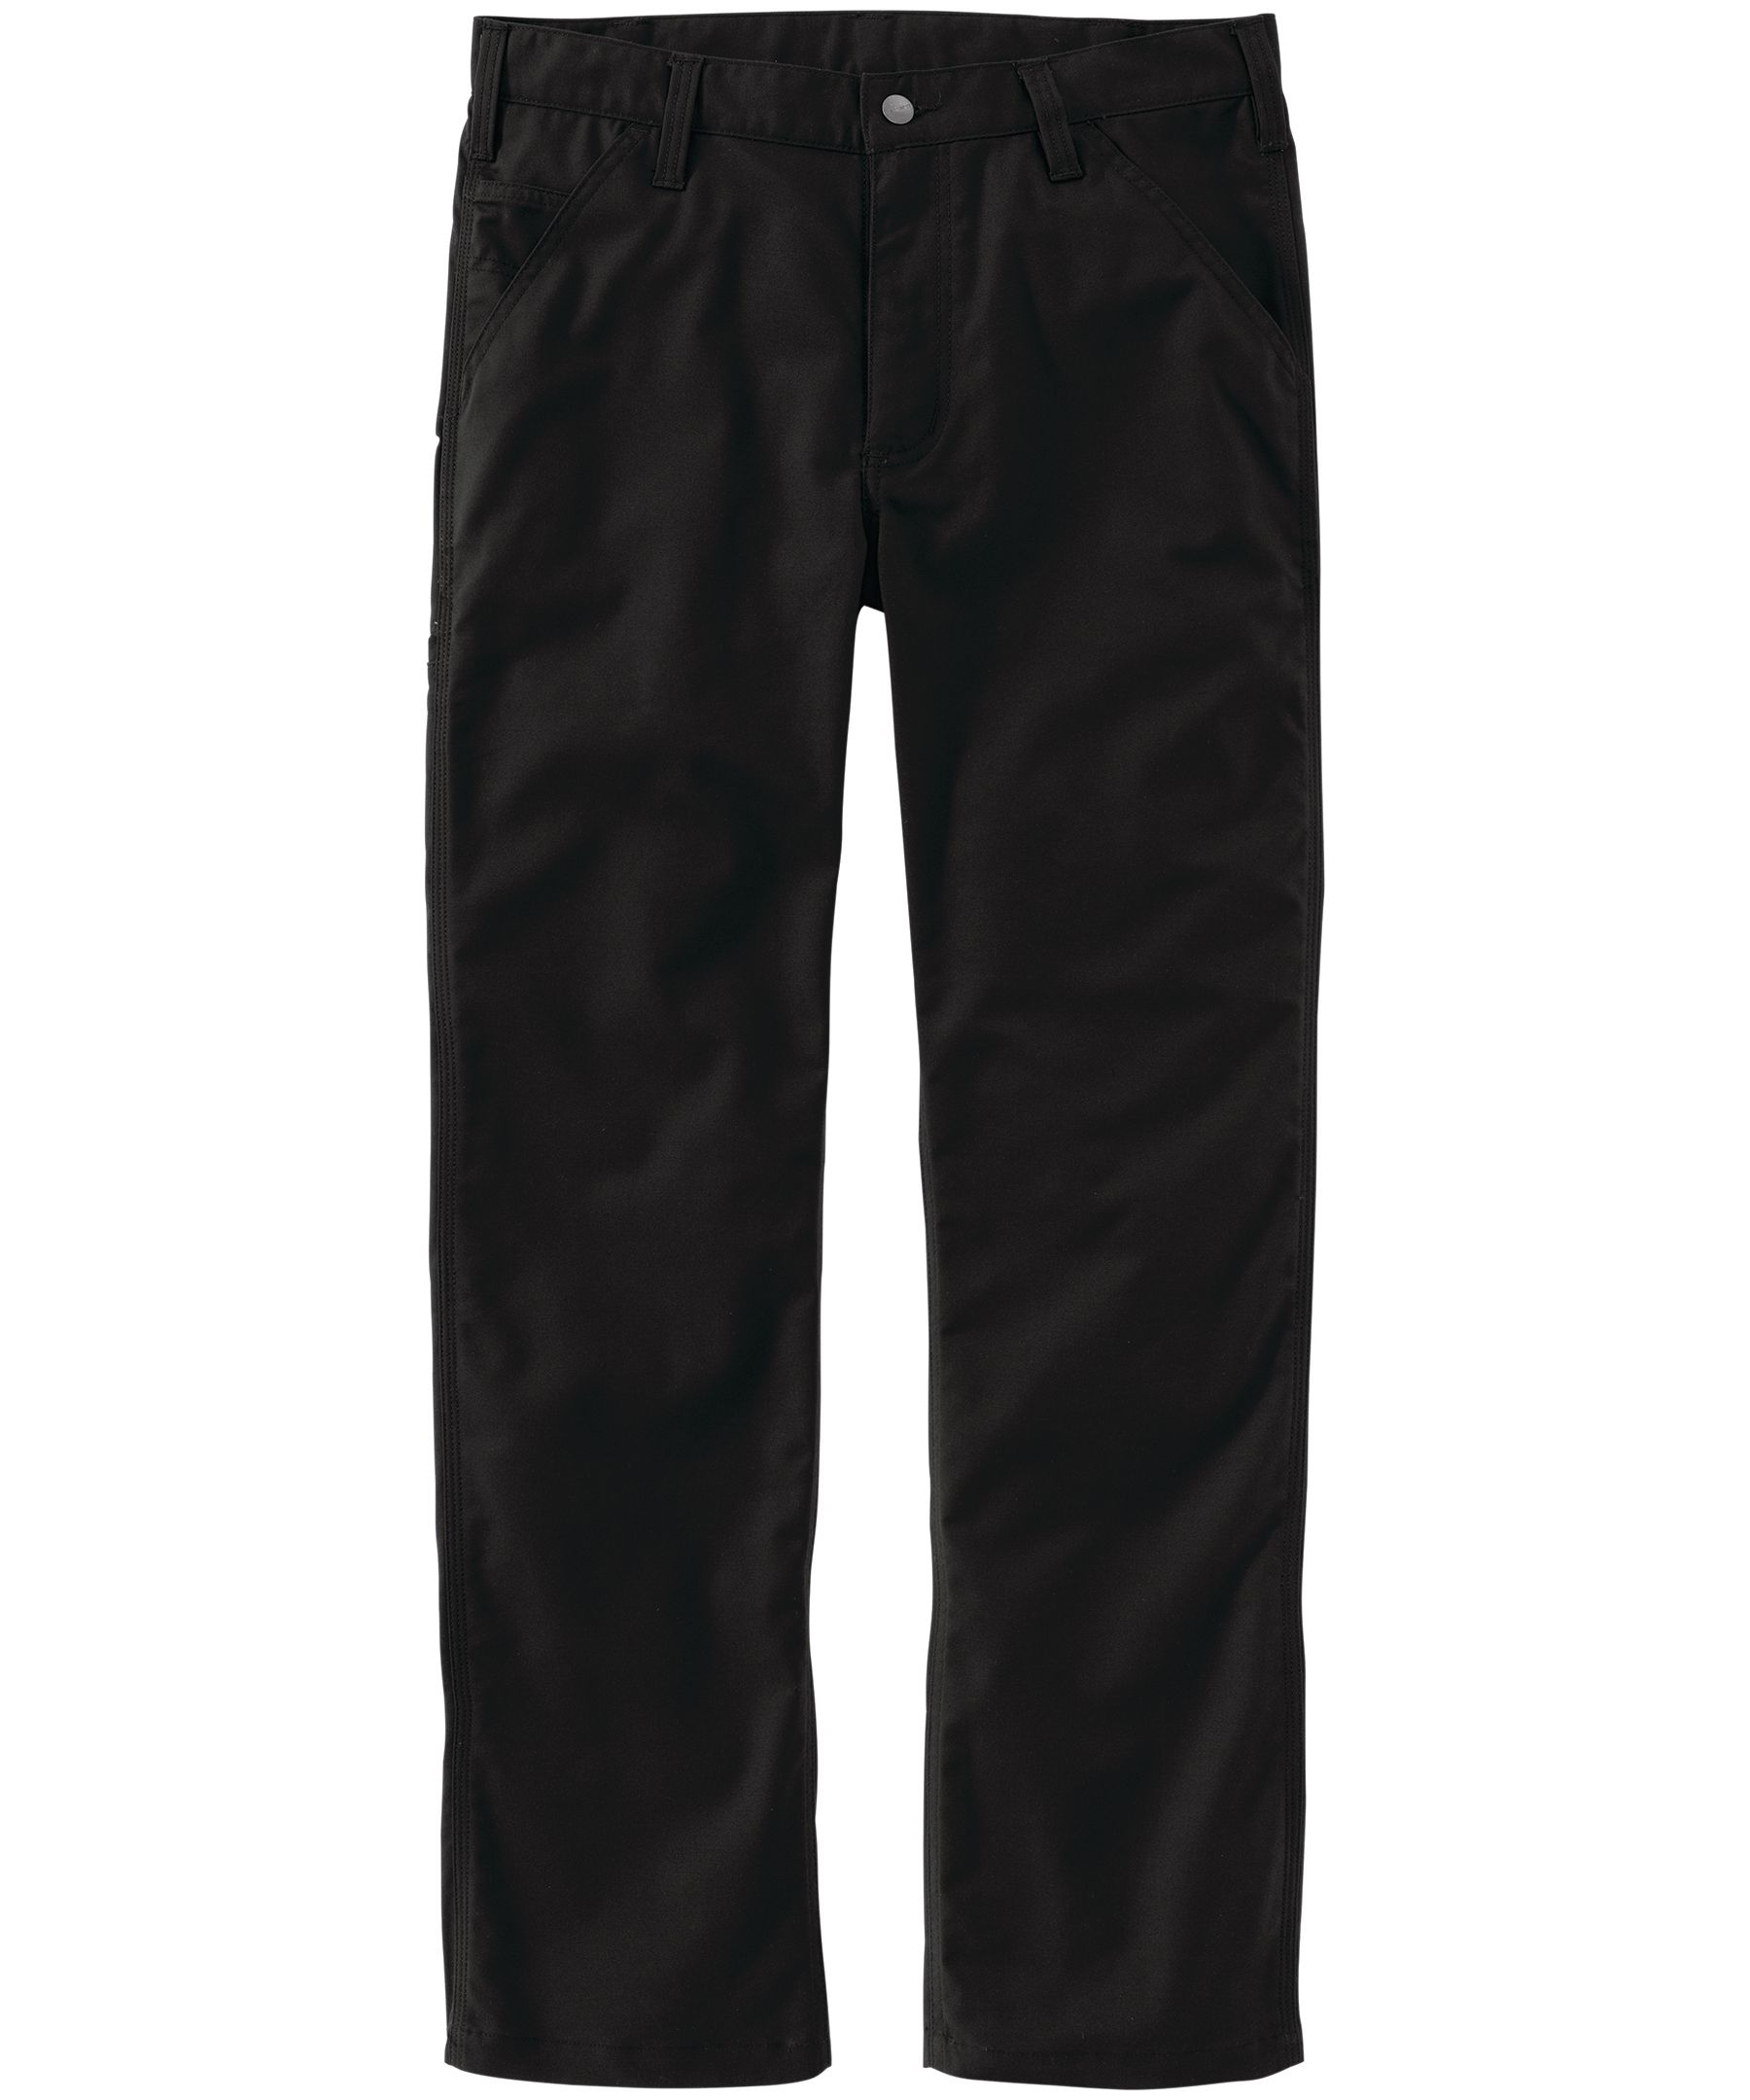 Carhartt Men's Rugged Flex Professional Series Relaxed Fit Work Pants ...